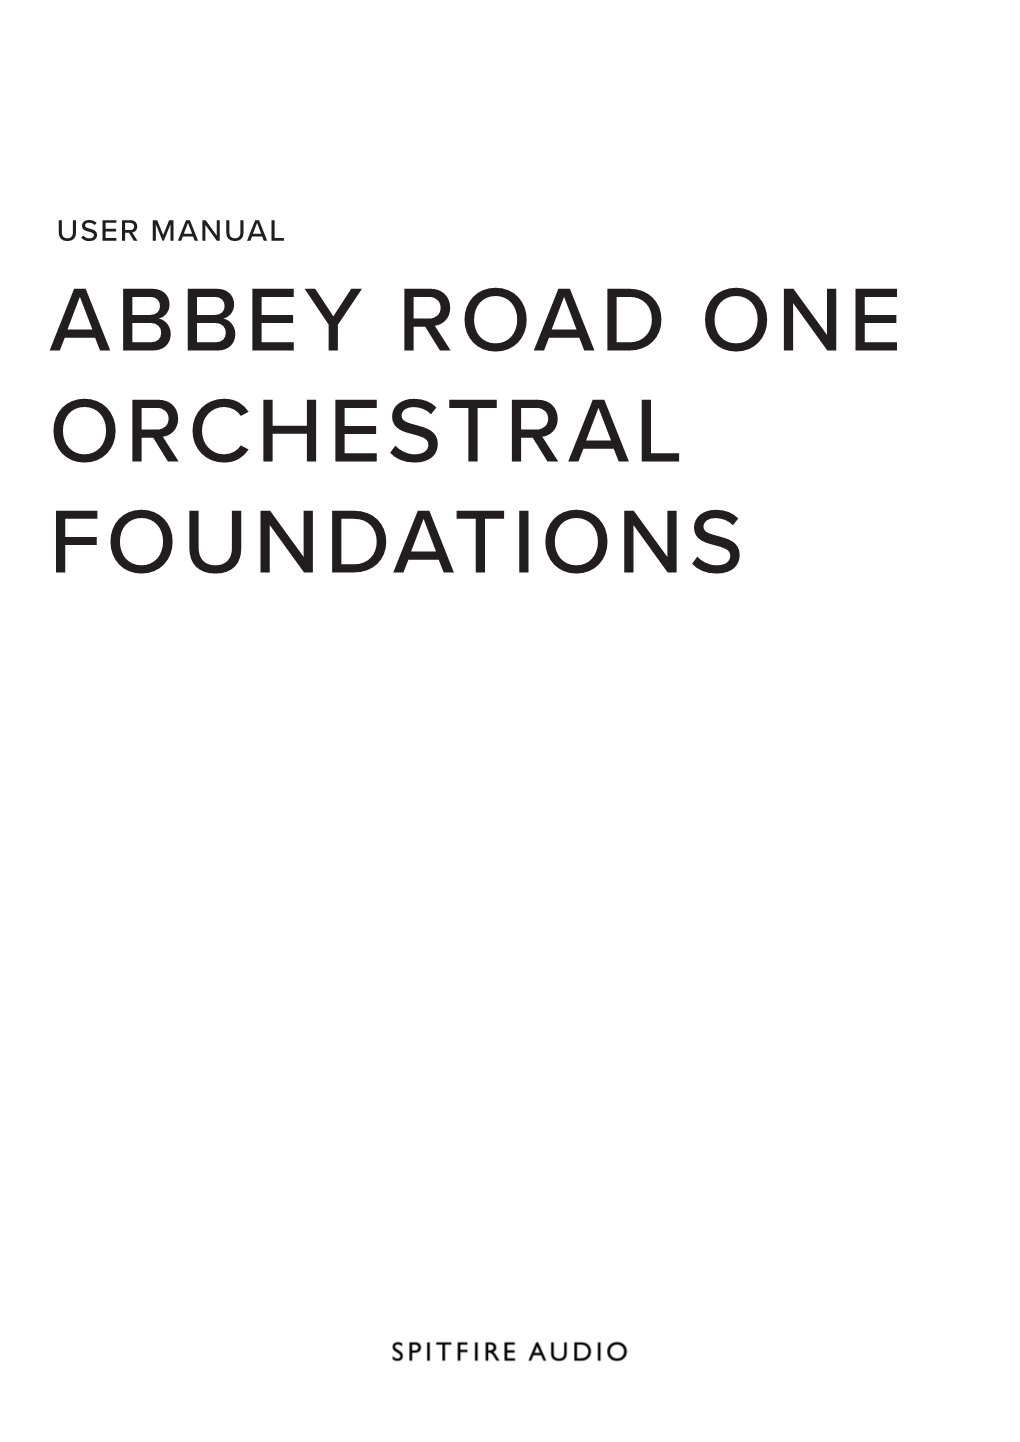 User Manual Abbey Road One Orchestral Foundations Contents